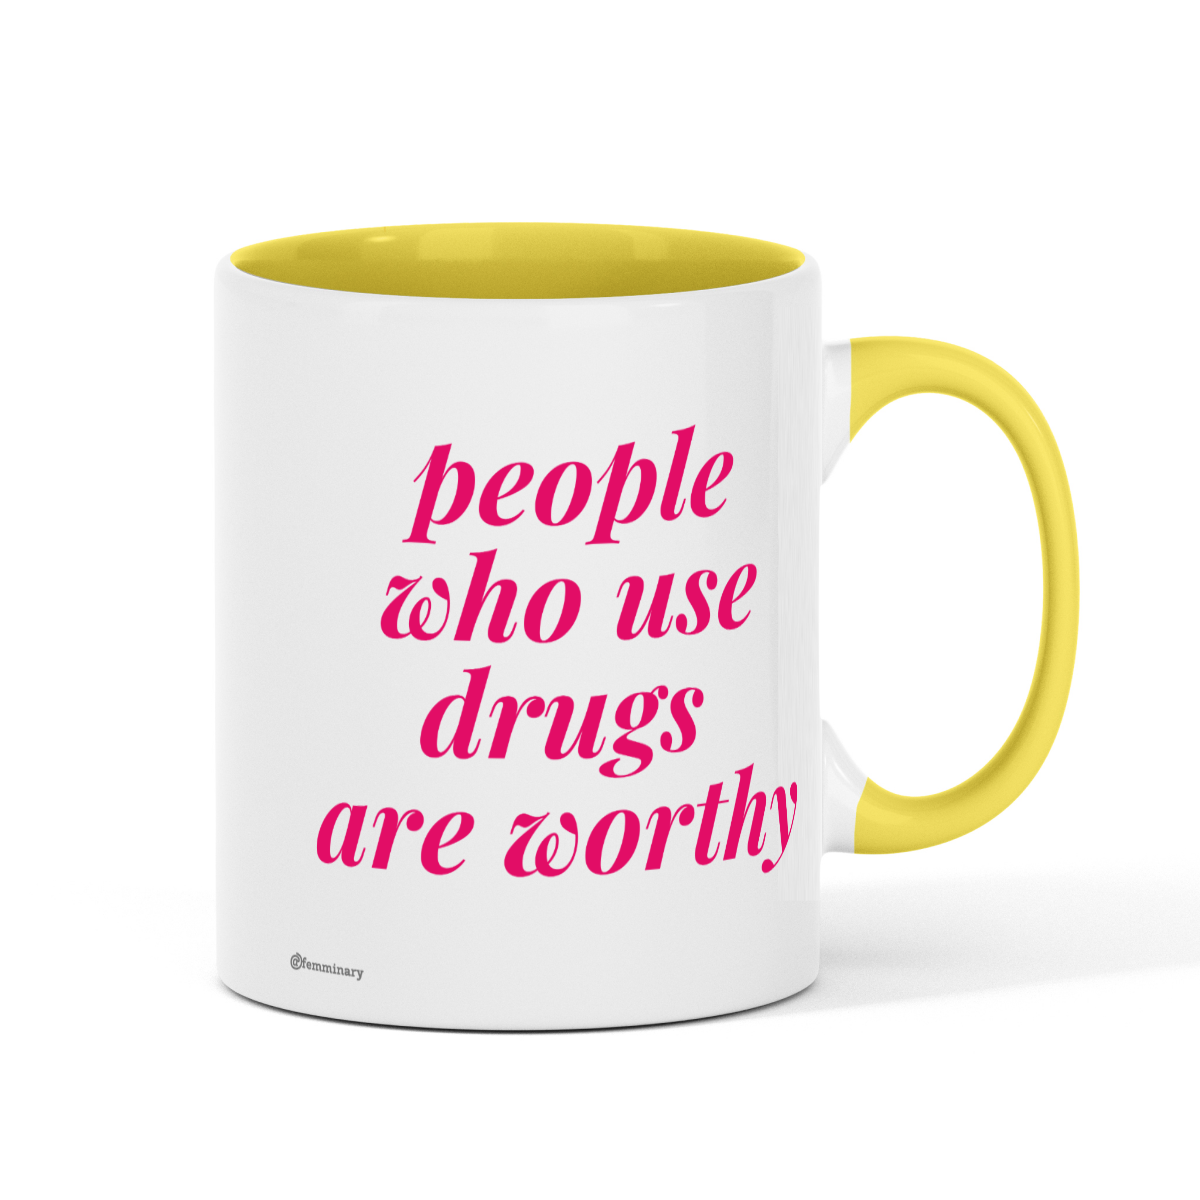 People Who Use Drugs Are Worthy